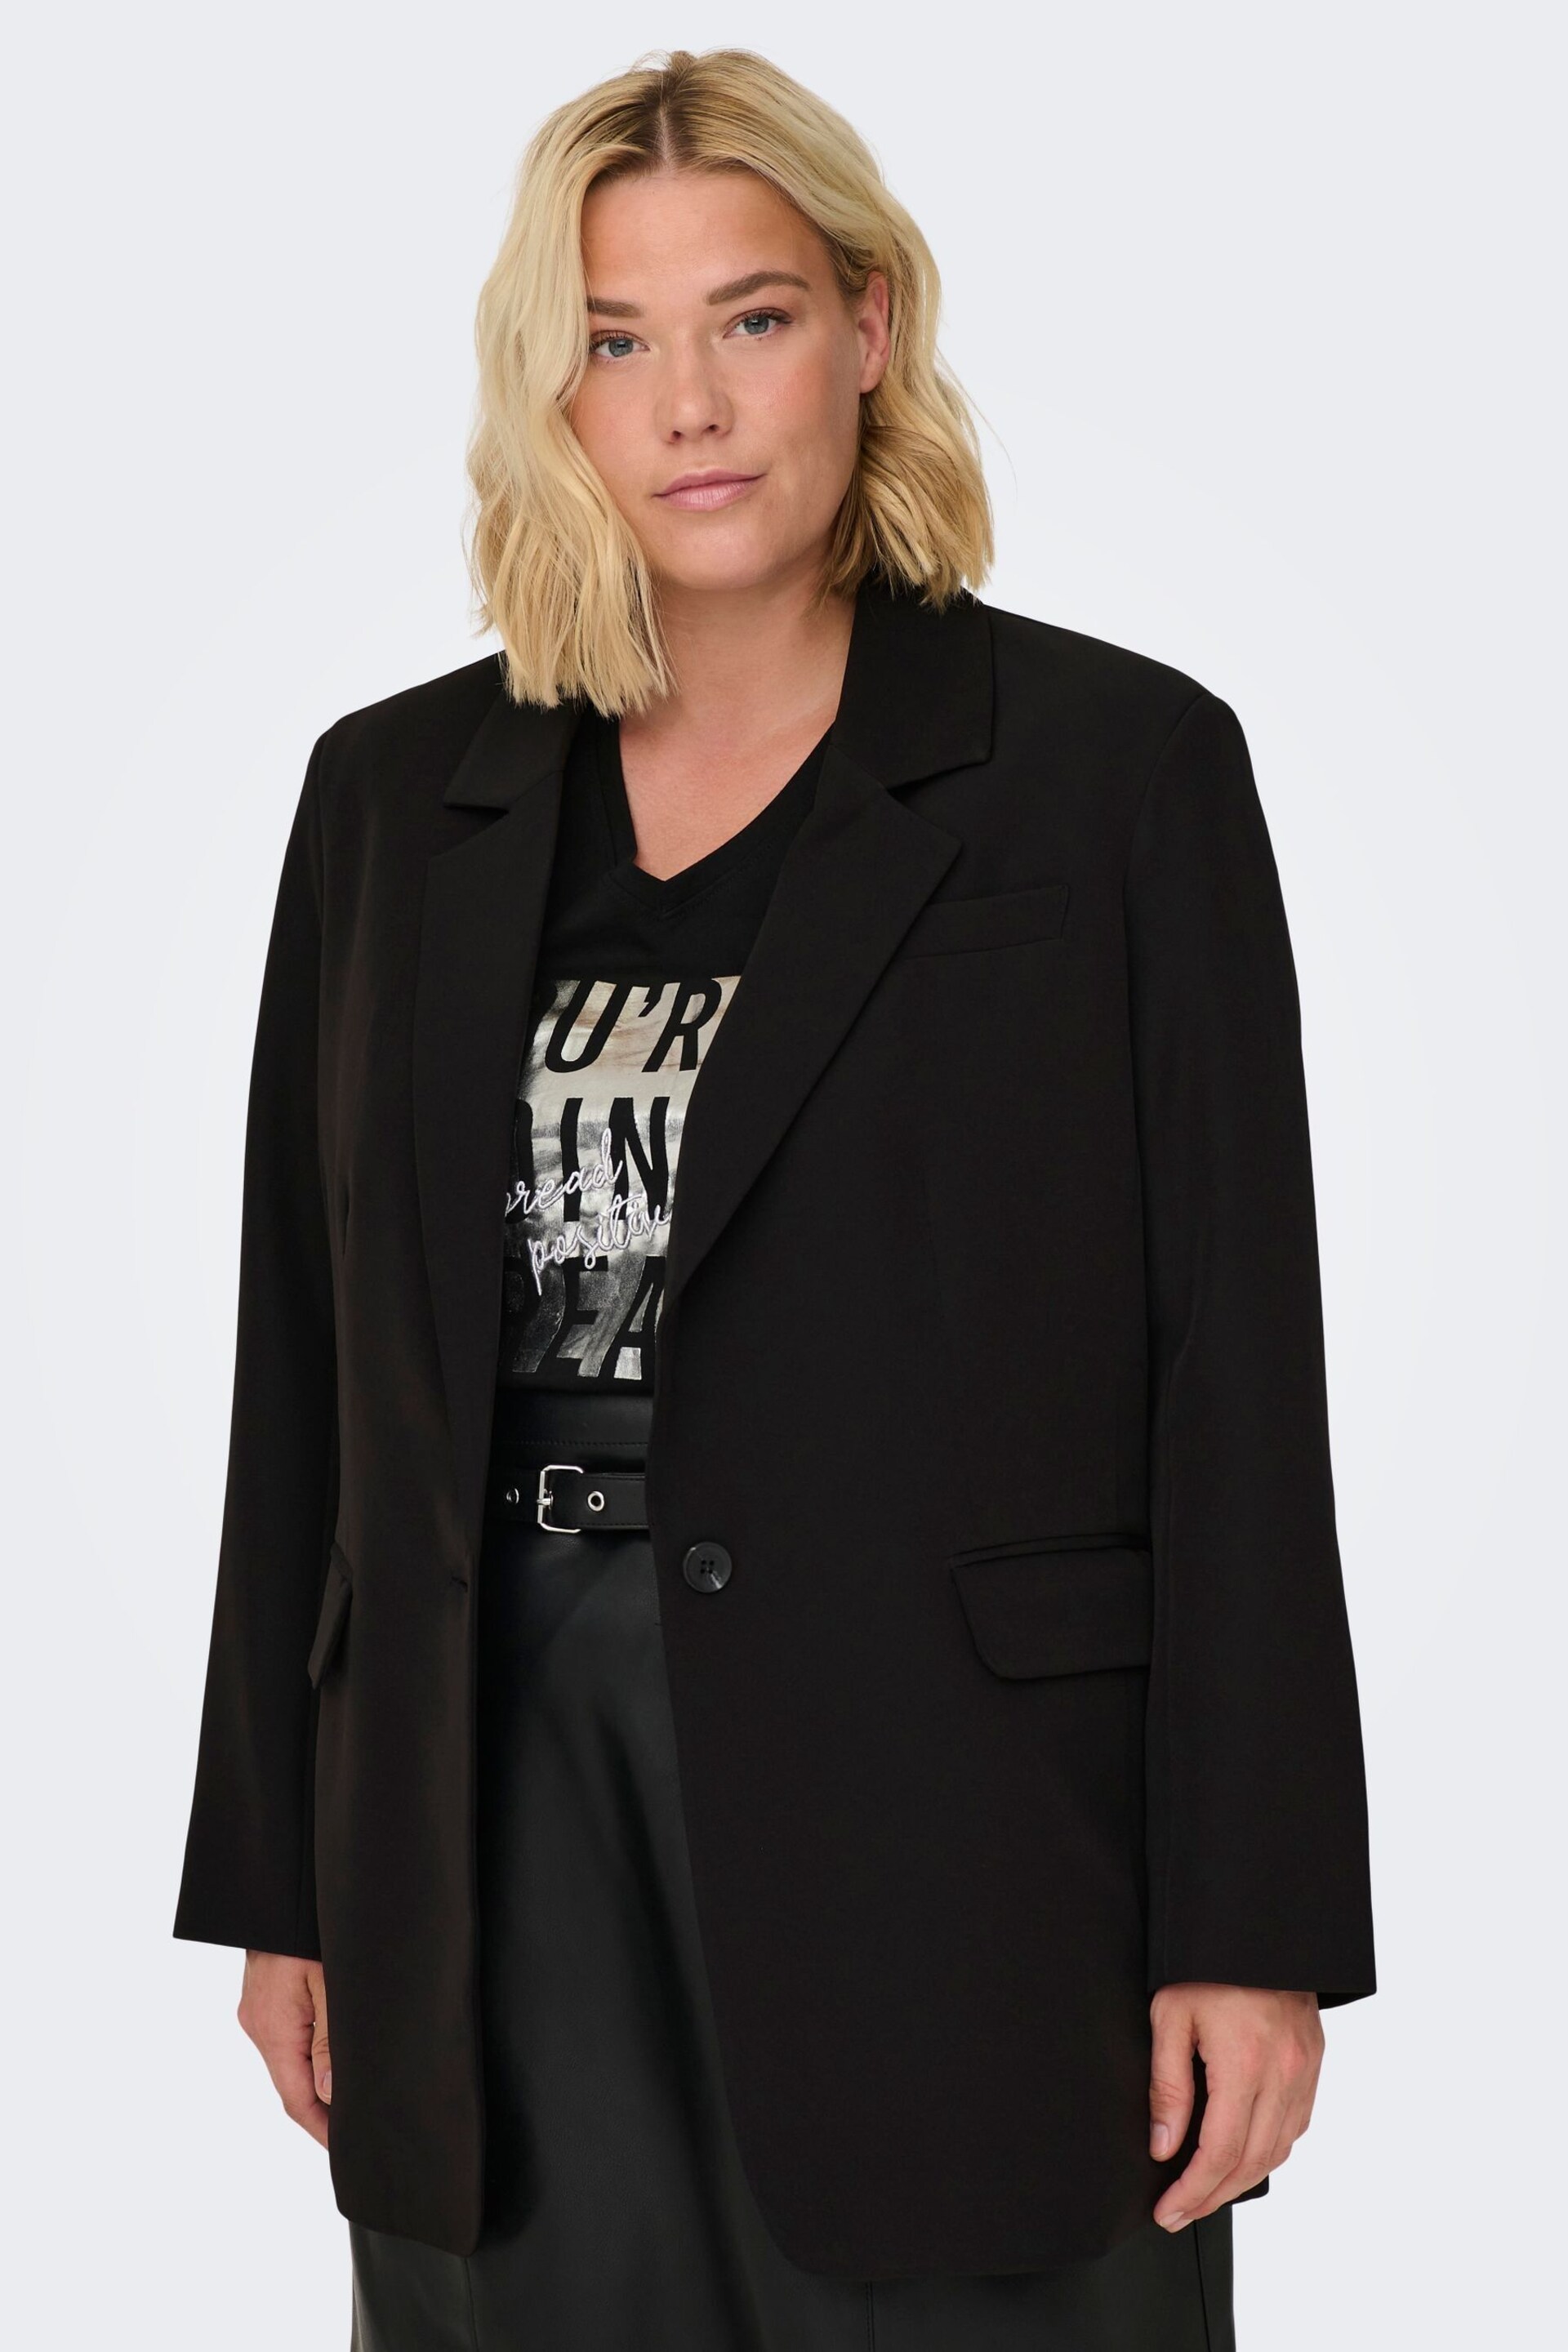 ONLY Curve Black Tailored Blazer - Image 3 of 5